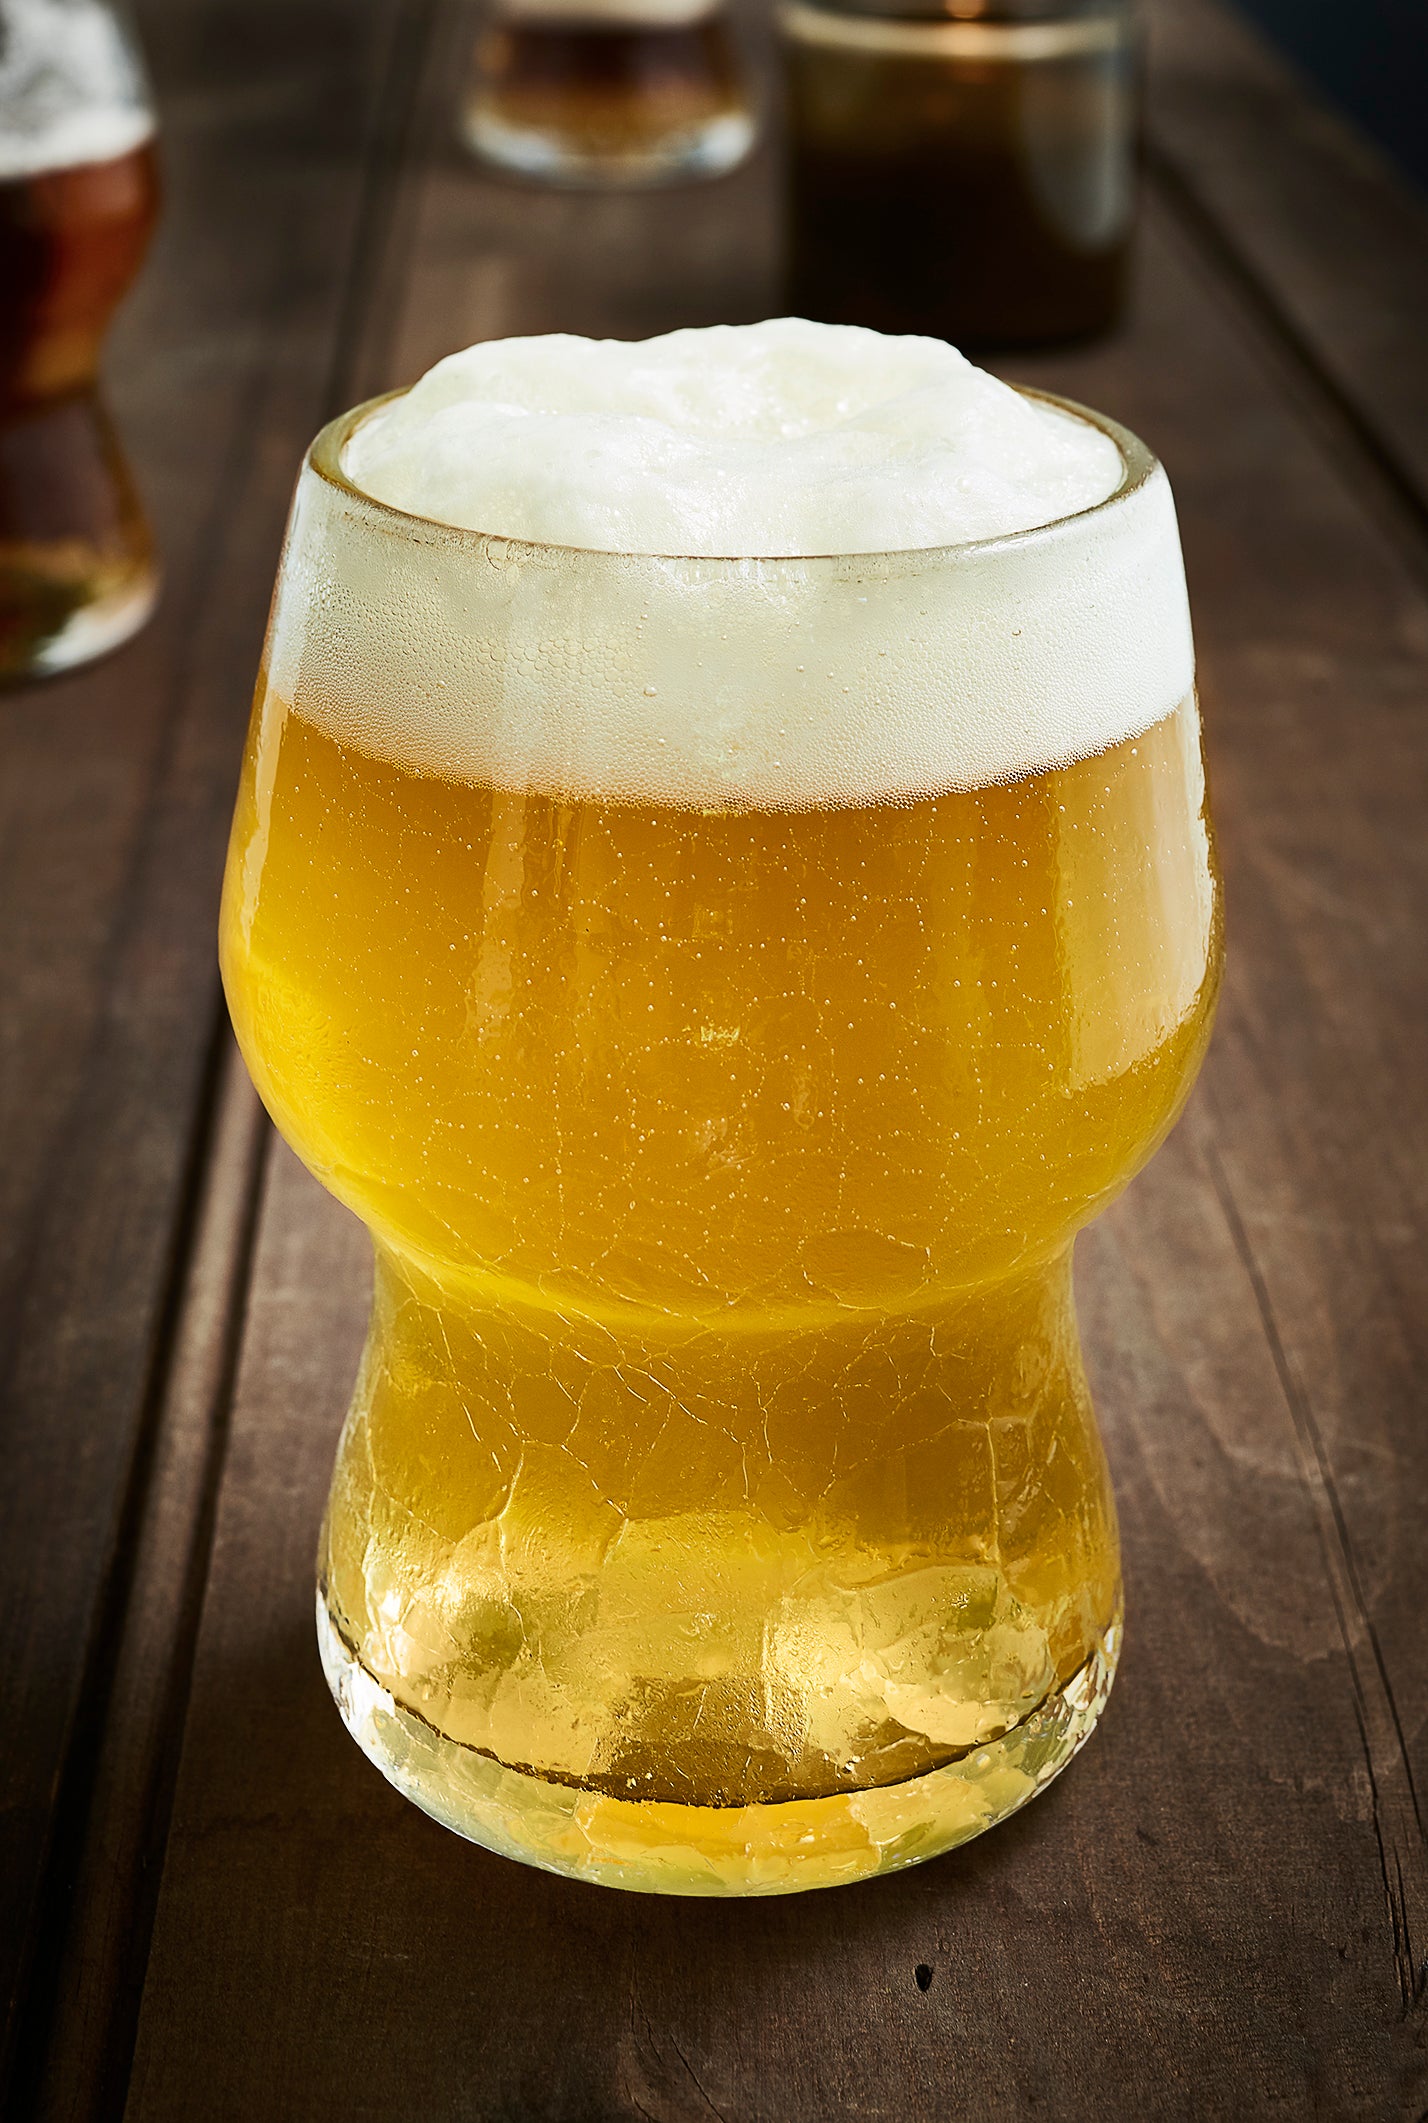 A clear Gray Art Glass crackle beer glass filled with beer sits on a wooden table.